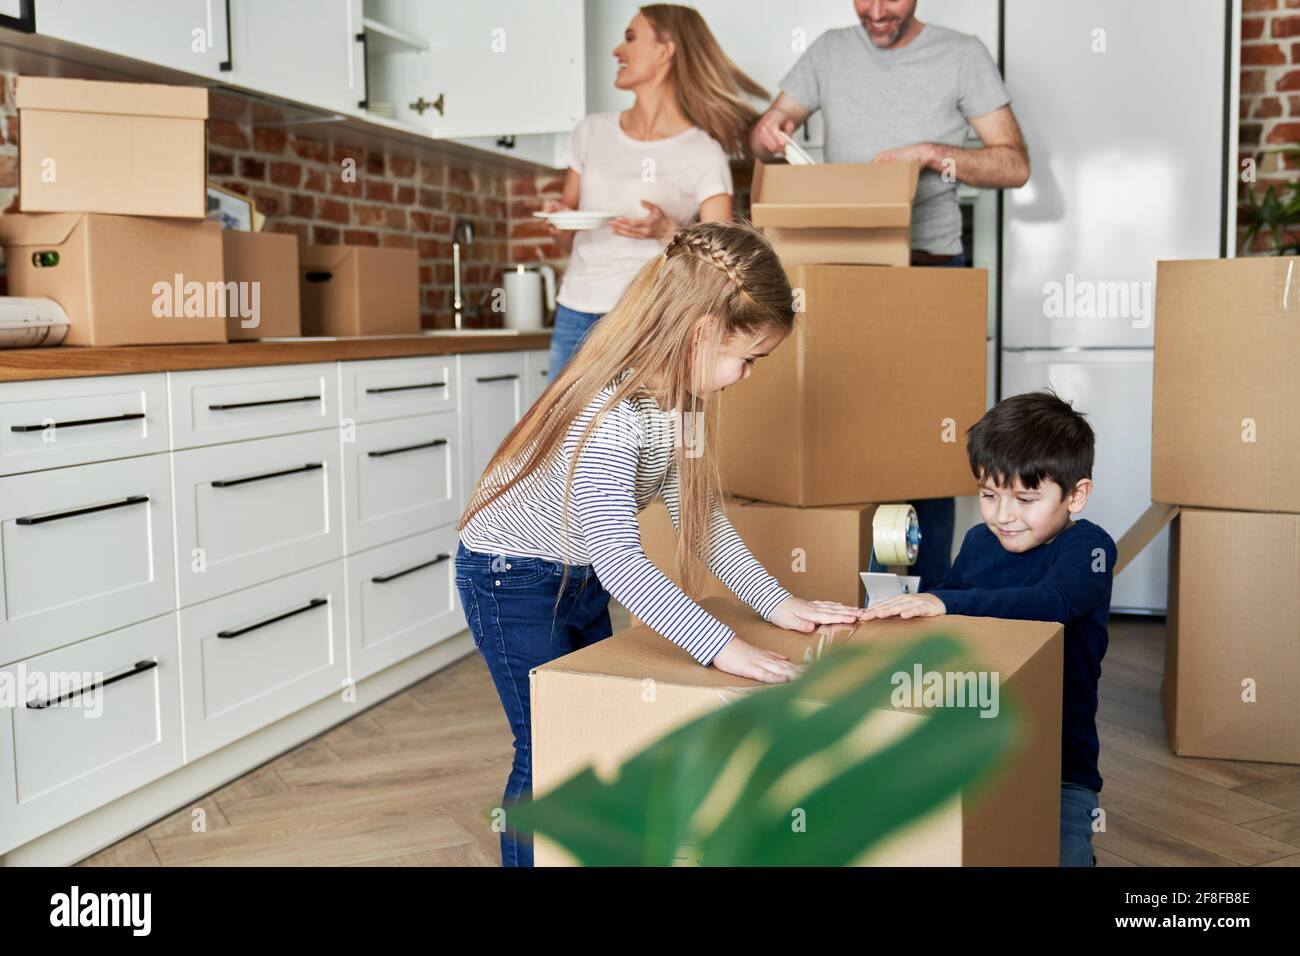 Siblings help with packing cardboard boxes for moving house Stock Photo